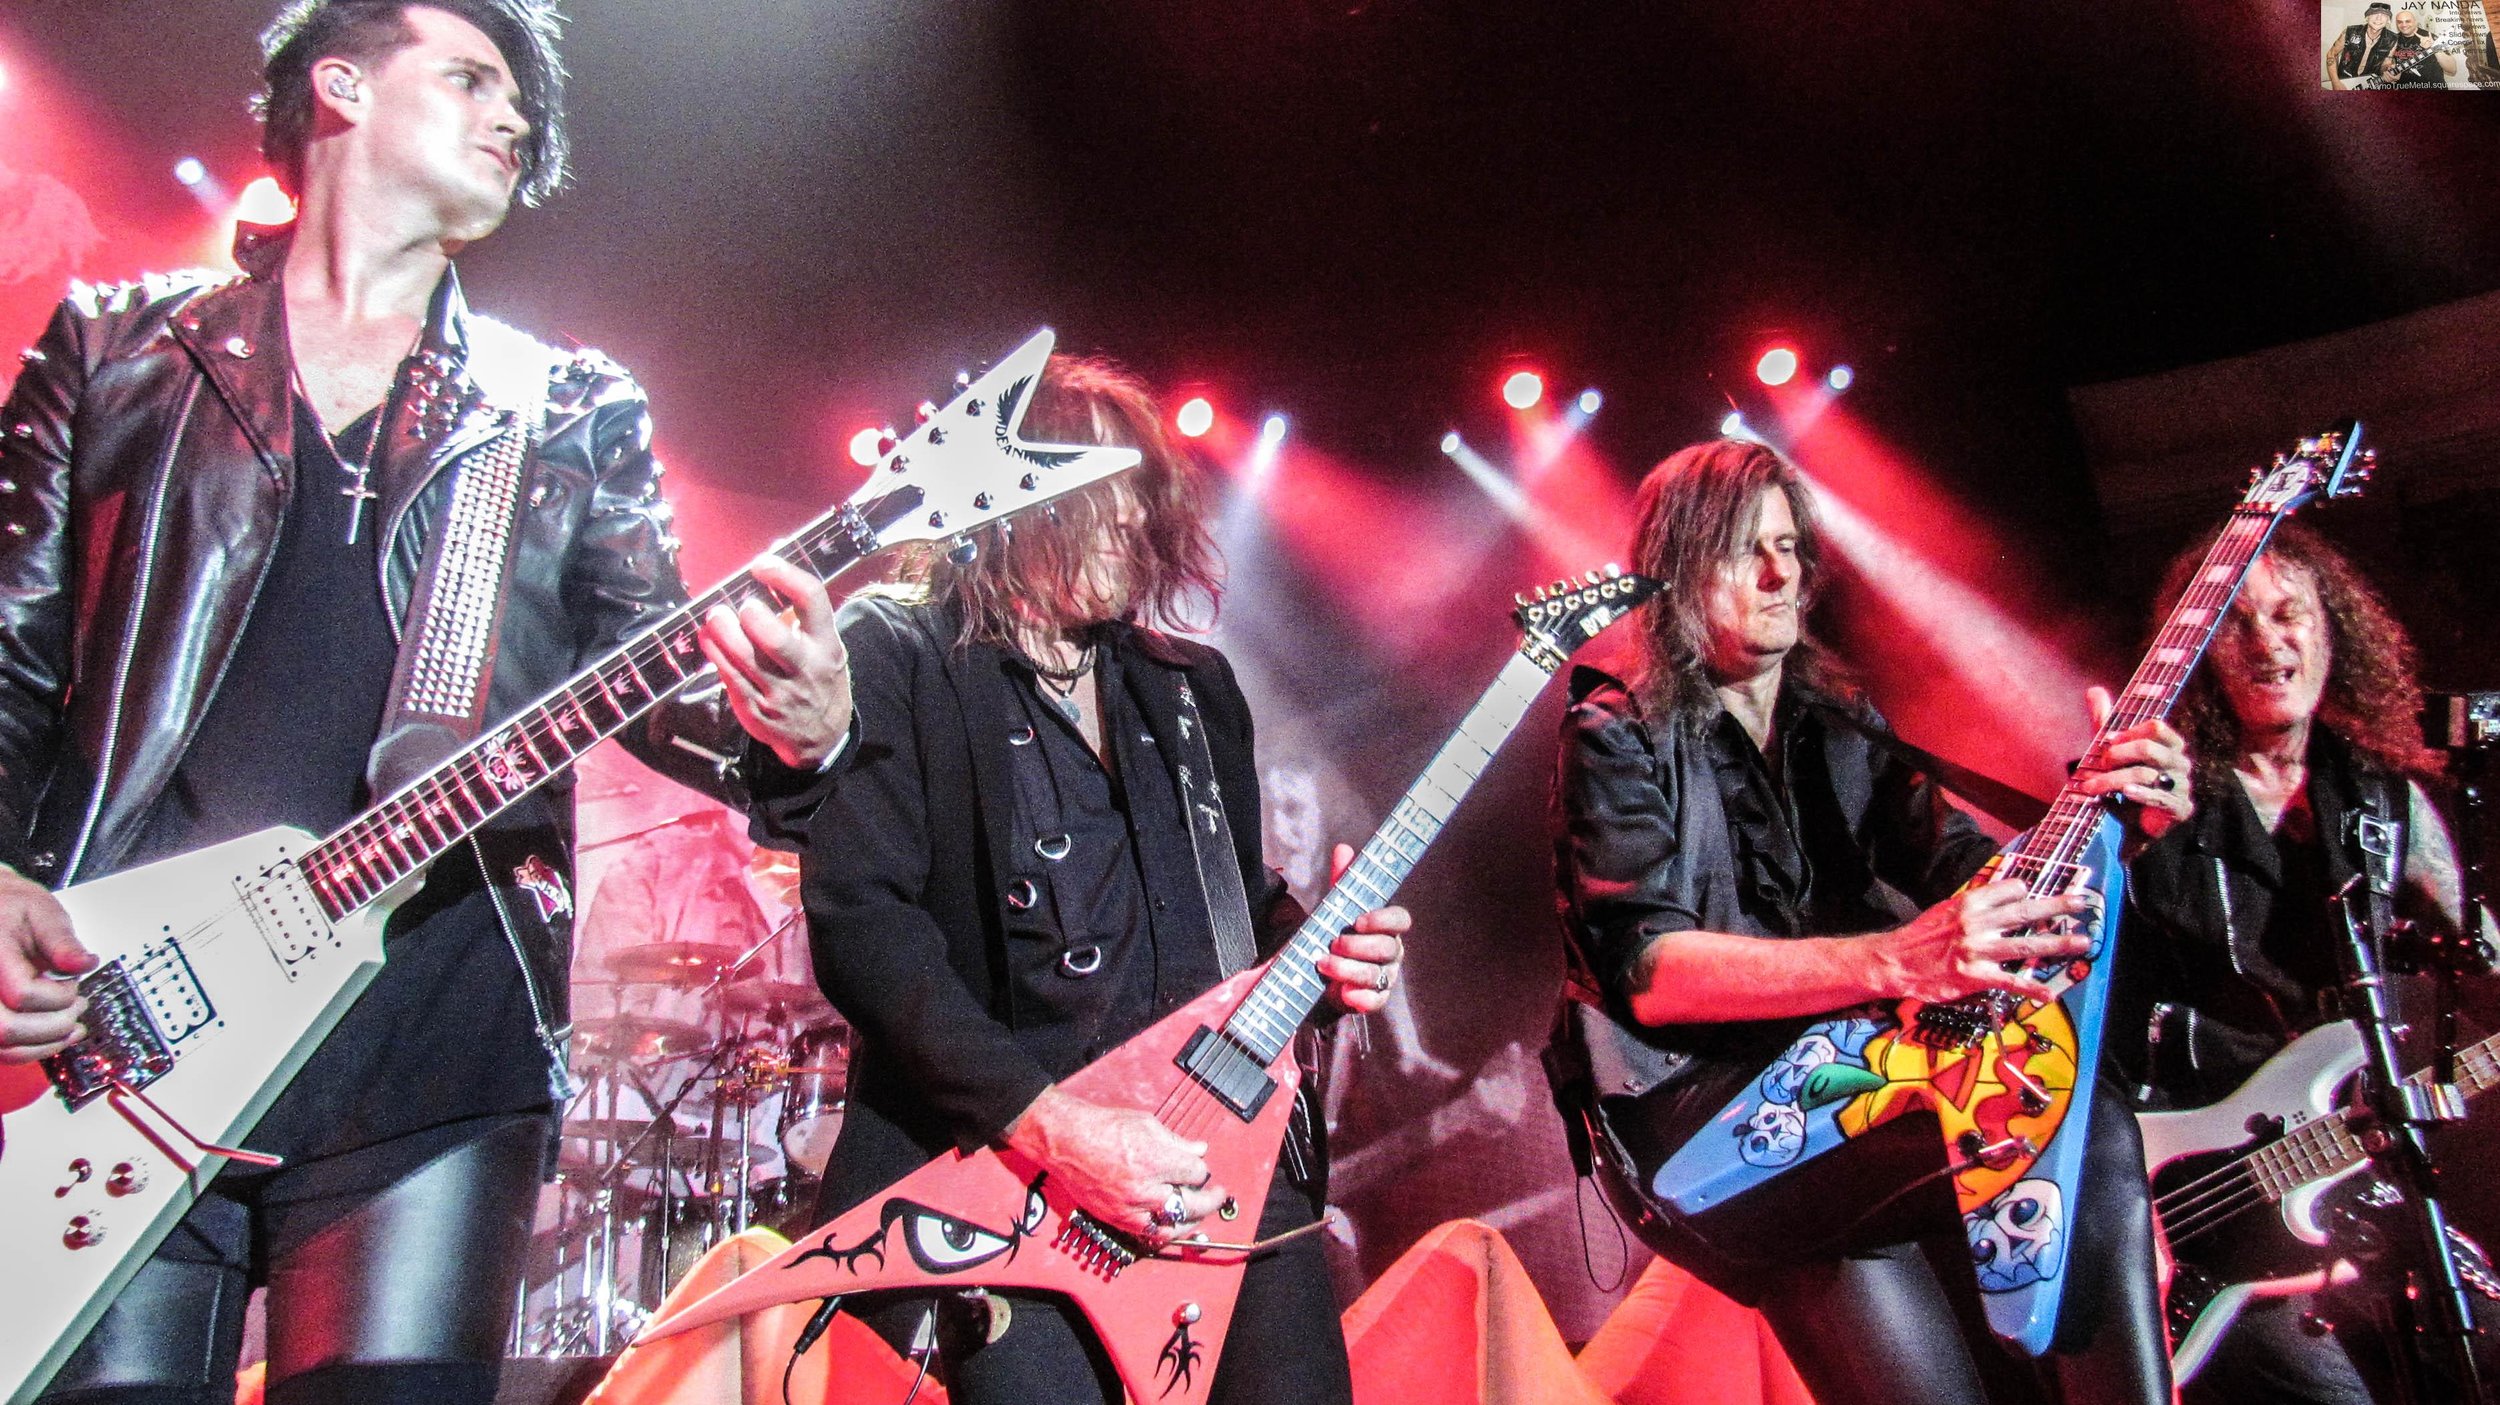  Helloween’s “Pumpkins United” tour stopped at the Hollywood Palladium in Los Angeles last Saturday night, with guitarists (from left) Sascha Gerstner, Kai Hansen, Michael Weikath and bassist Markus Grosskopf coming together on opening track “Hallowe